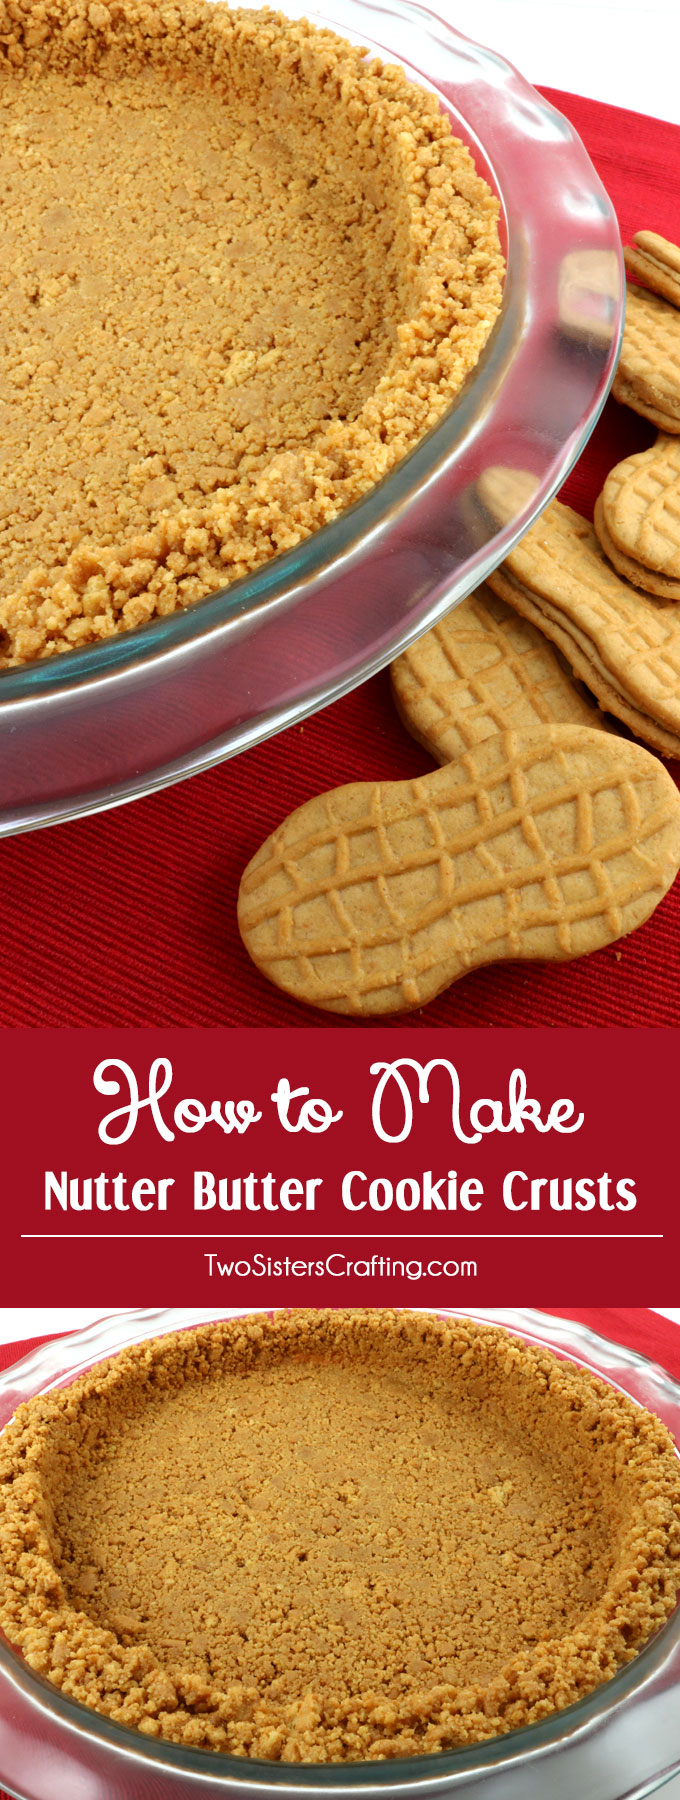 We show you How to Make Nutter Butter Cookie Crusts that are super easy to make, can be bake or no-bake and taste better than anything you can buy in the store. This is the Best Nutter Butter Crust recipe that you are going to find. Pin this Perfect Nutter Butter Cookie Crust recipe for later and follow us for more pie crust recipe ideas.